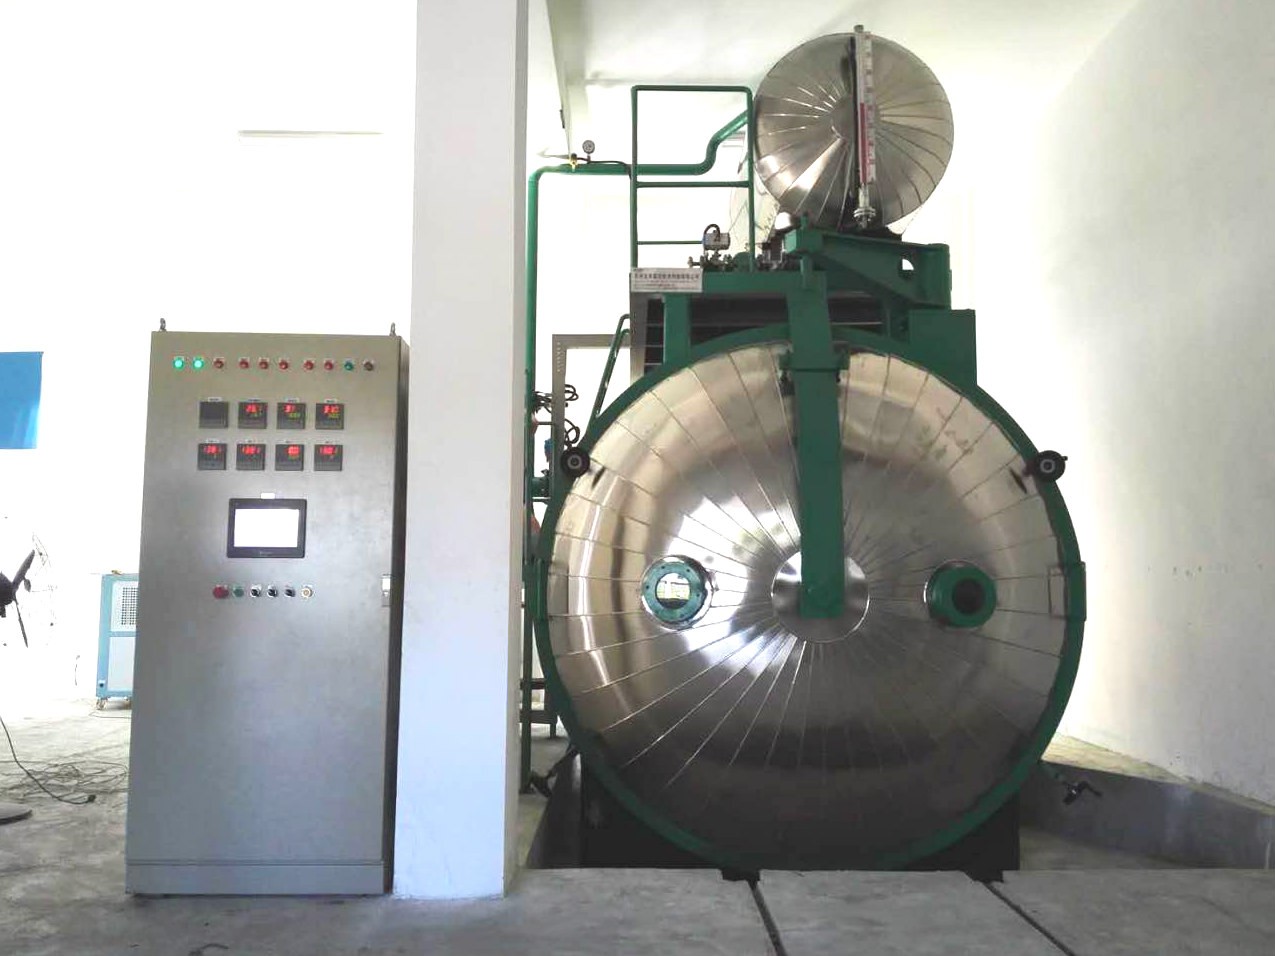 Vacuum drying For Transformer Manufacturers, Vacuum drying For Transformer Factory, Supply Vacuum drying For Transformer